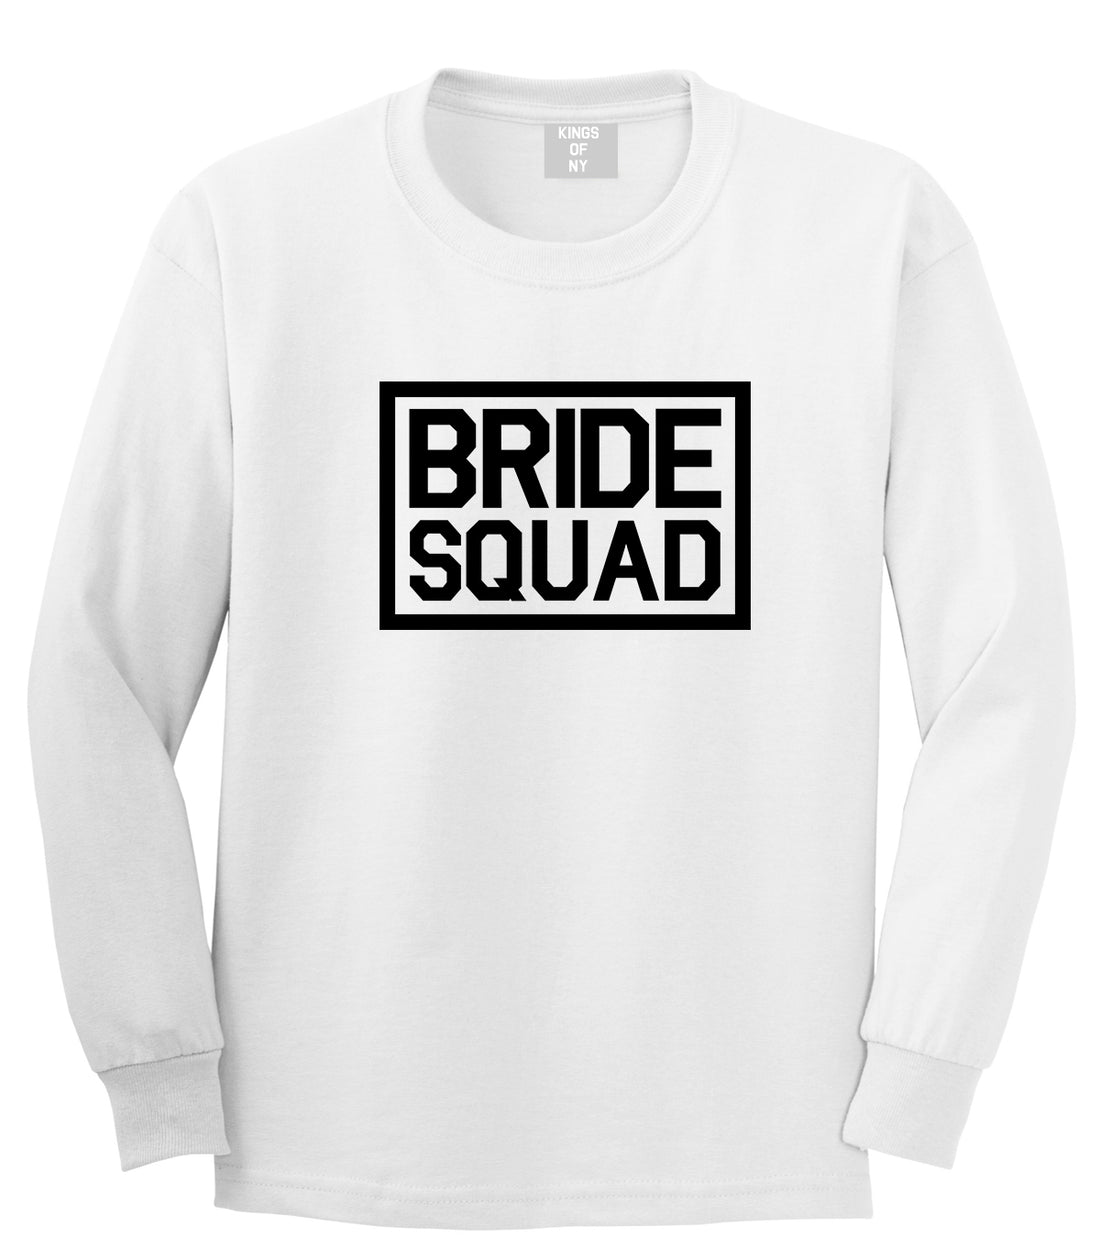 Bride Squad Bachlorette Party White Long Sleeve T-Shirt by Kings Of NY